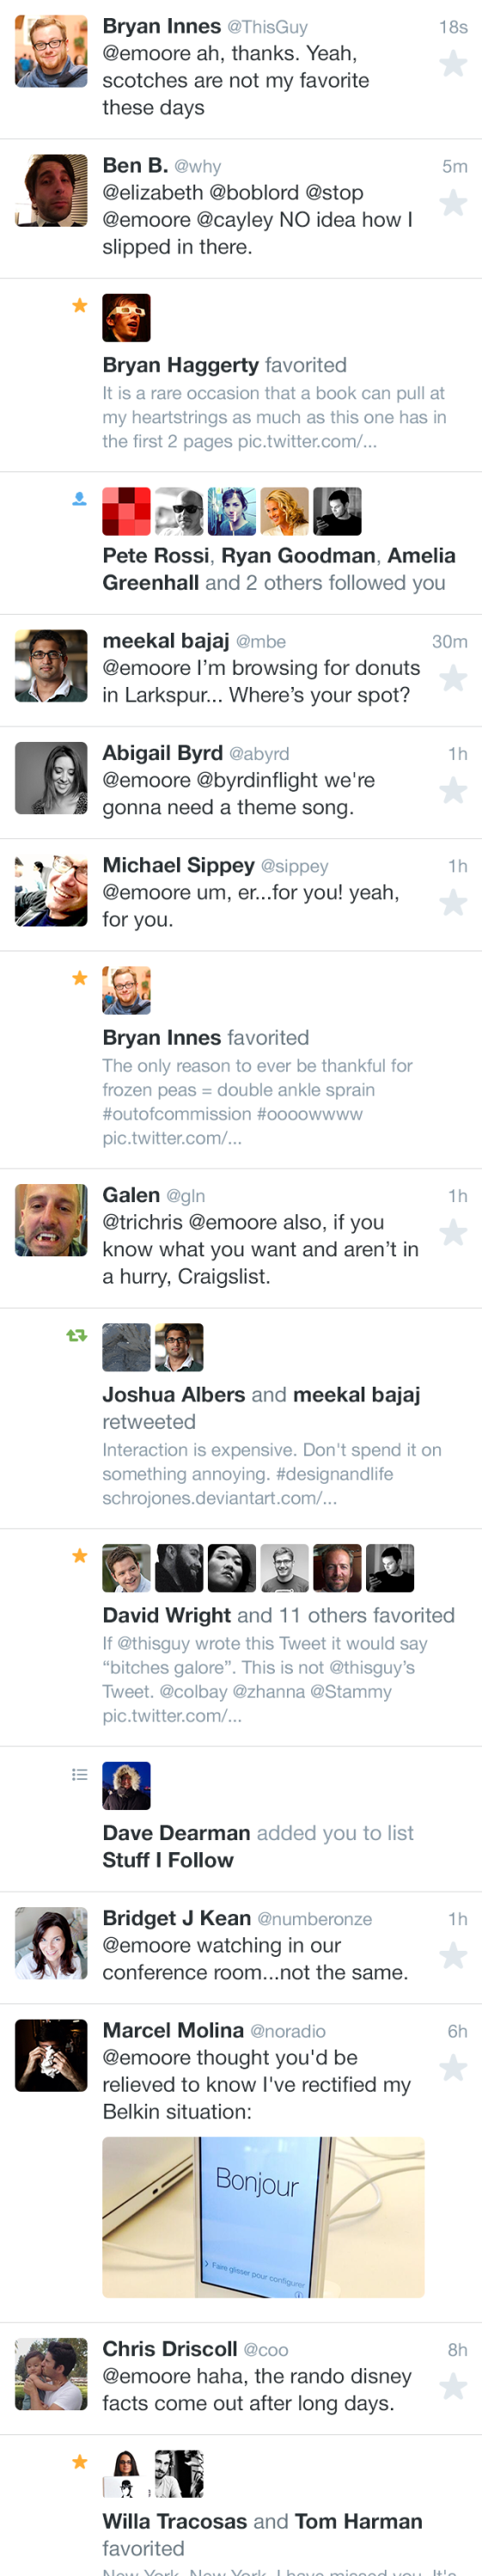 Twitter Highline mobile: Notifications